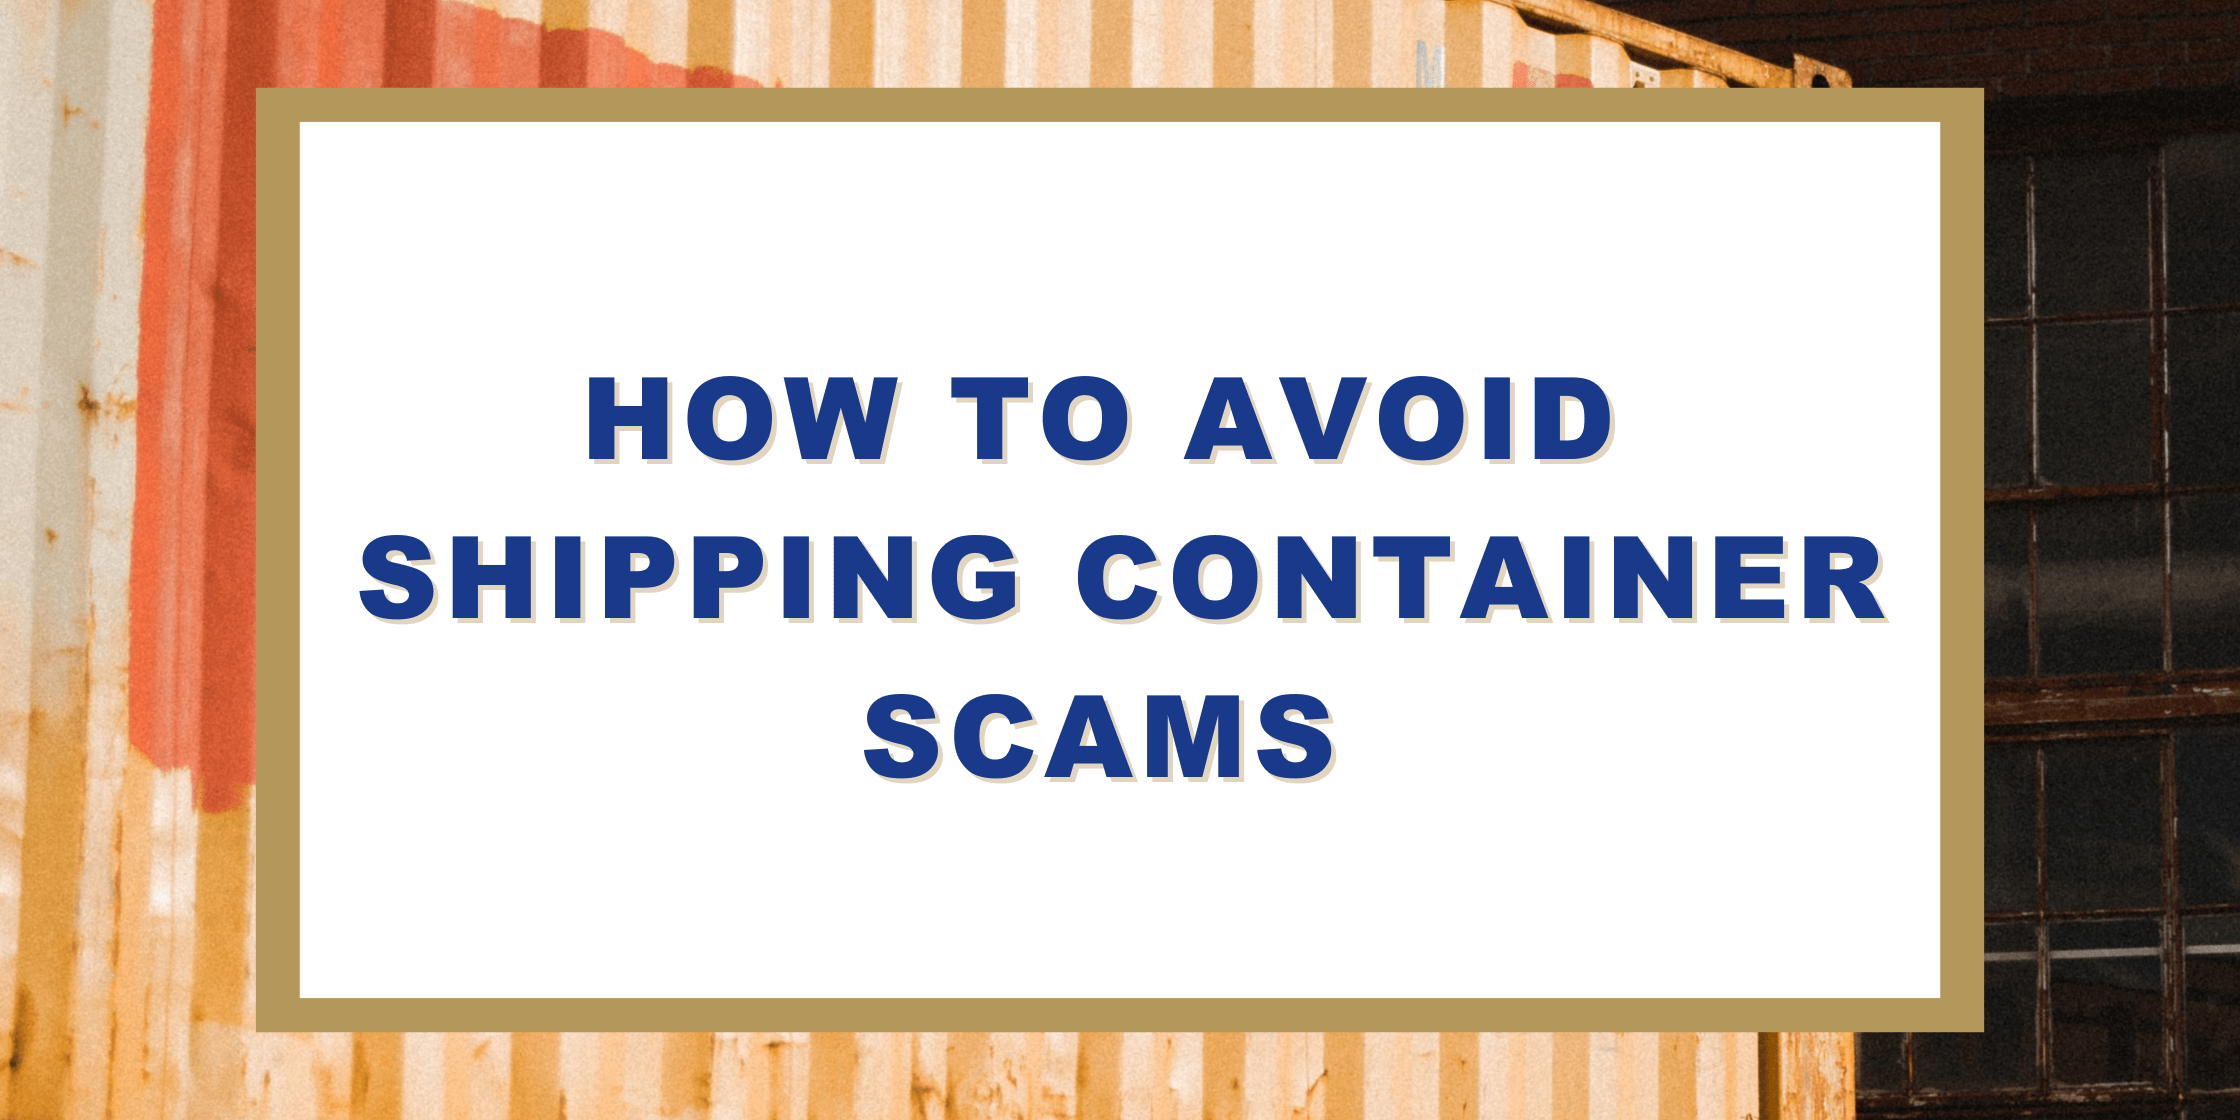 How To Avoid Shipping Container Scams